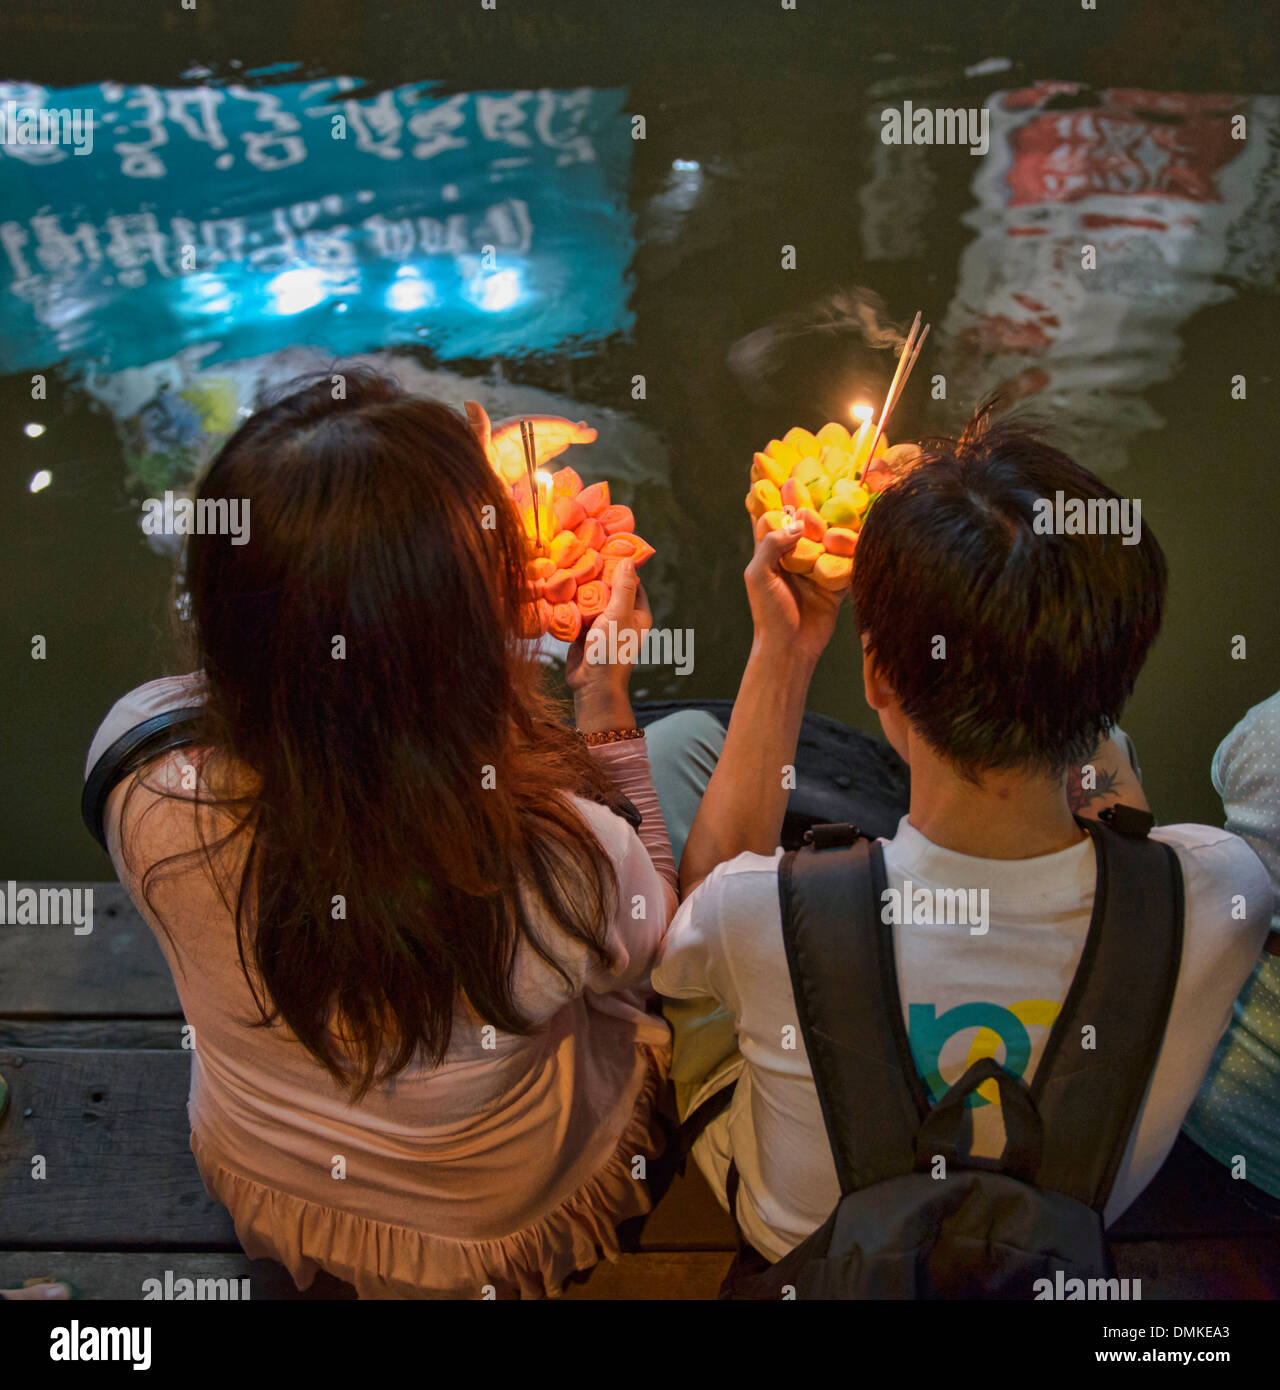 Friends gather to release floating offerings during Loy Kratong festival in Bangkok, Thailand Stock Photo